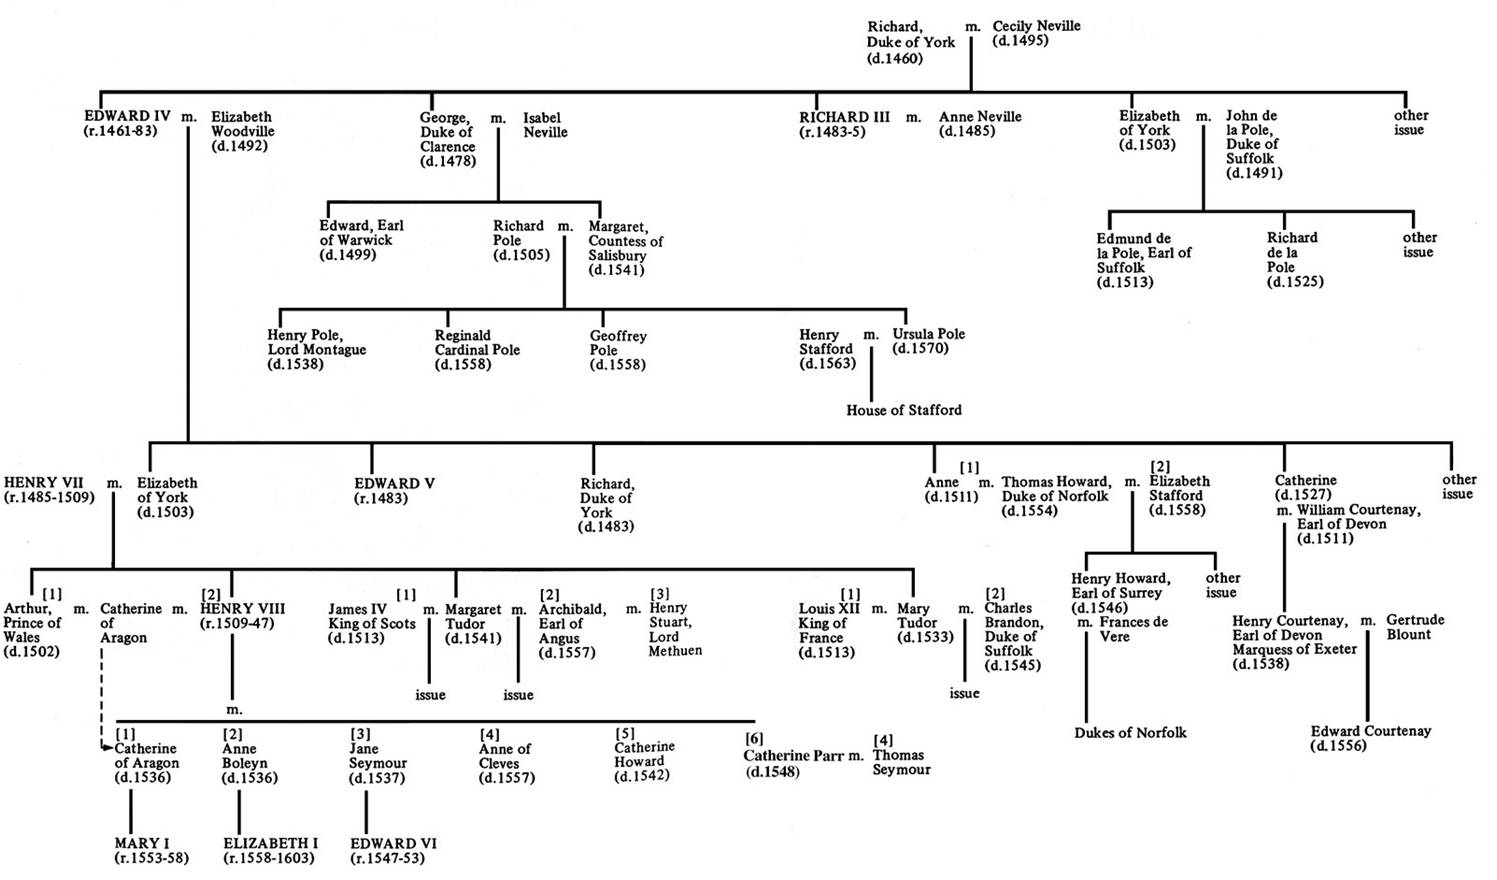 A diagram of a family tree

Description automatically generated